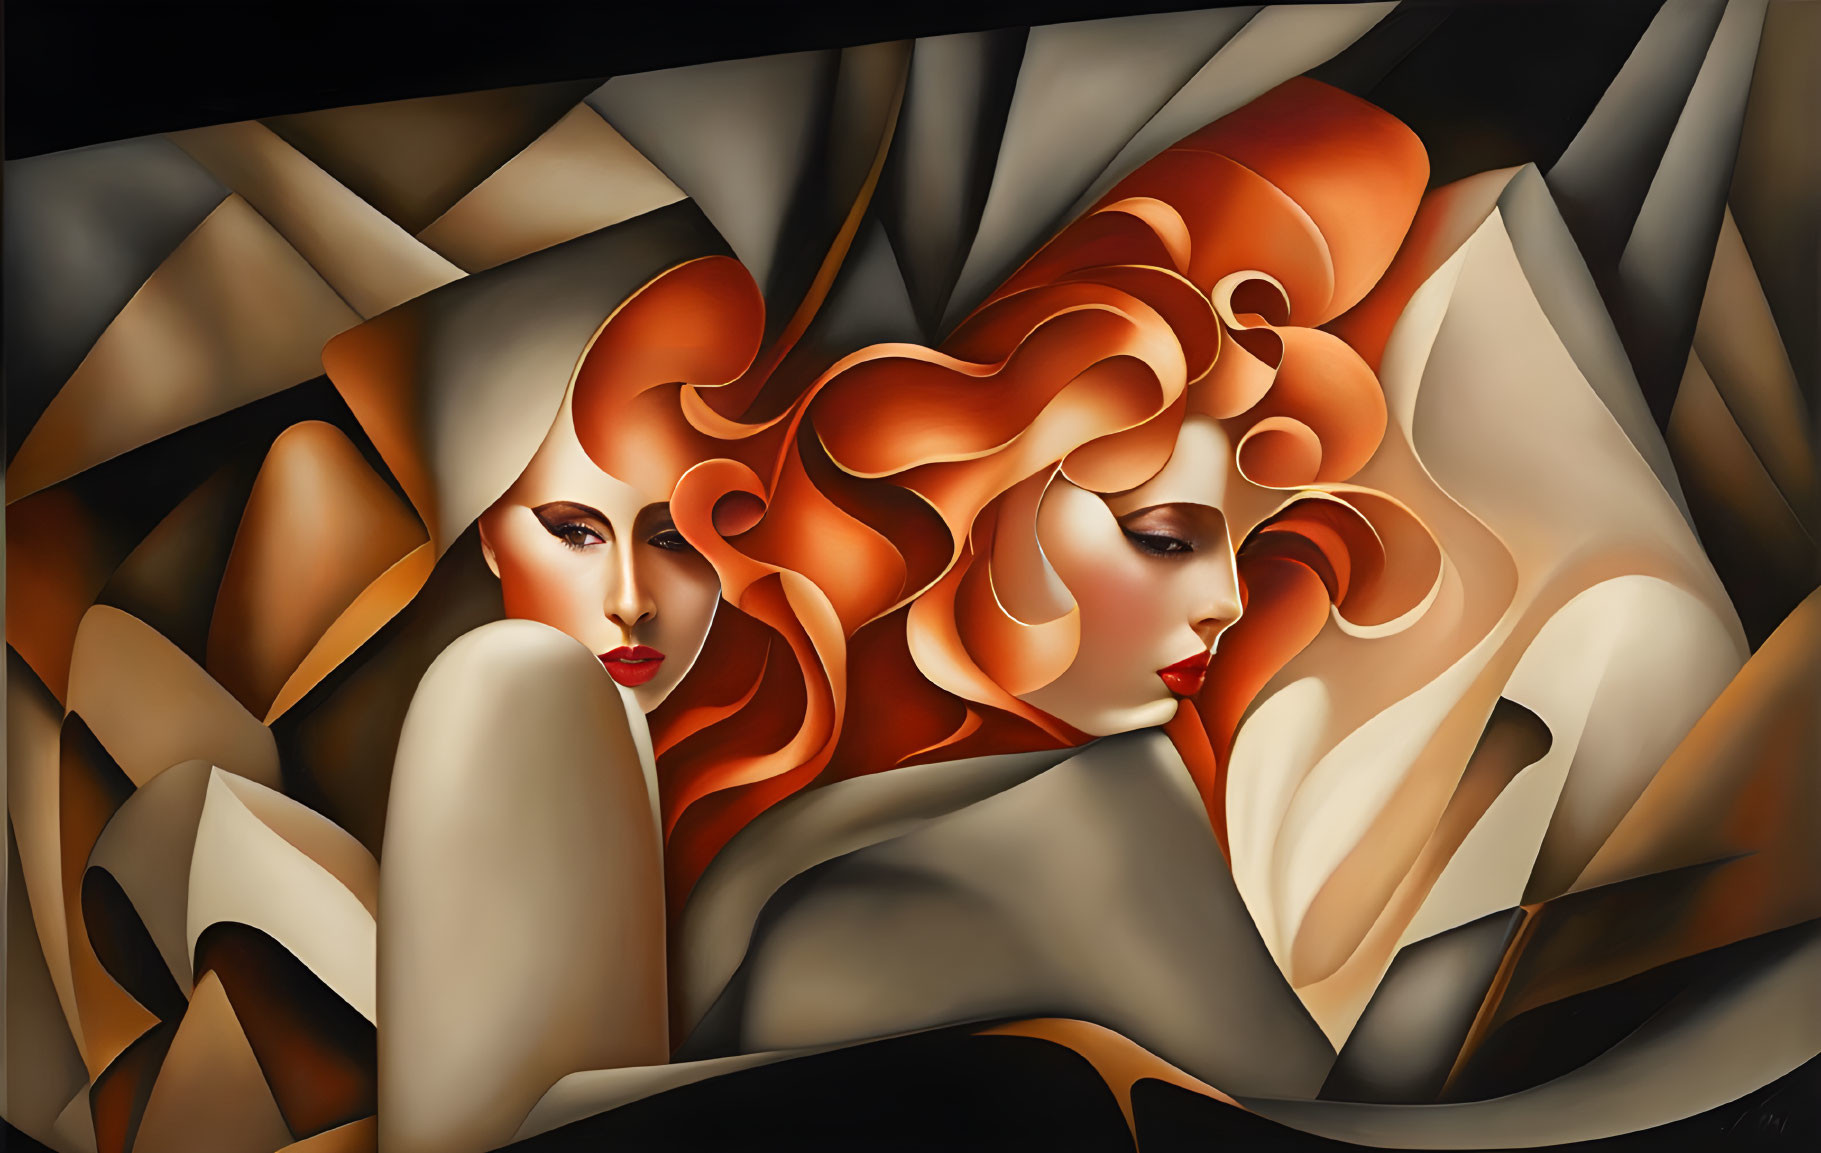 Abstract Art: Stylized Faces with Red Hair & Geometric Shapes in Warm Palette